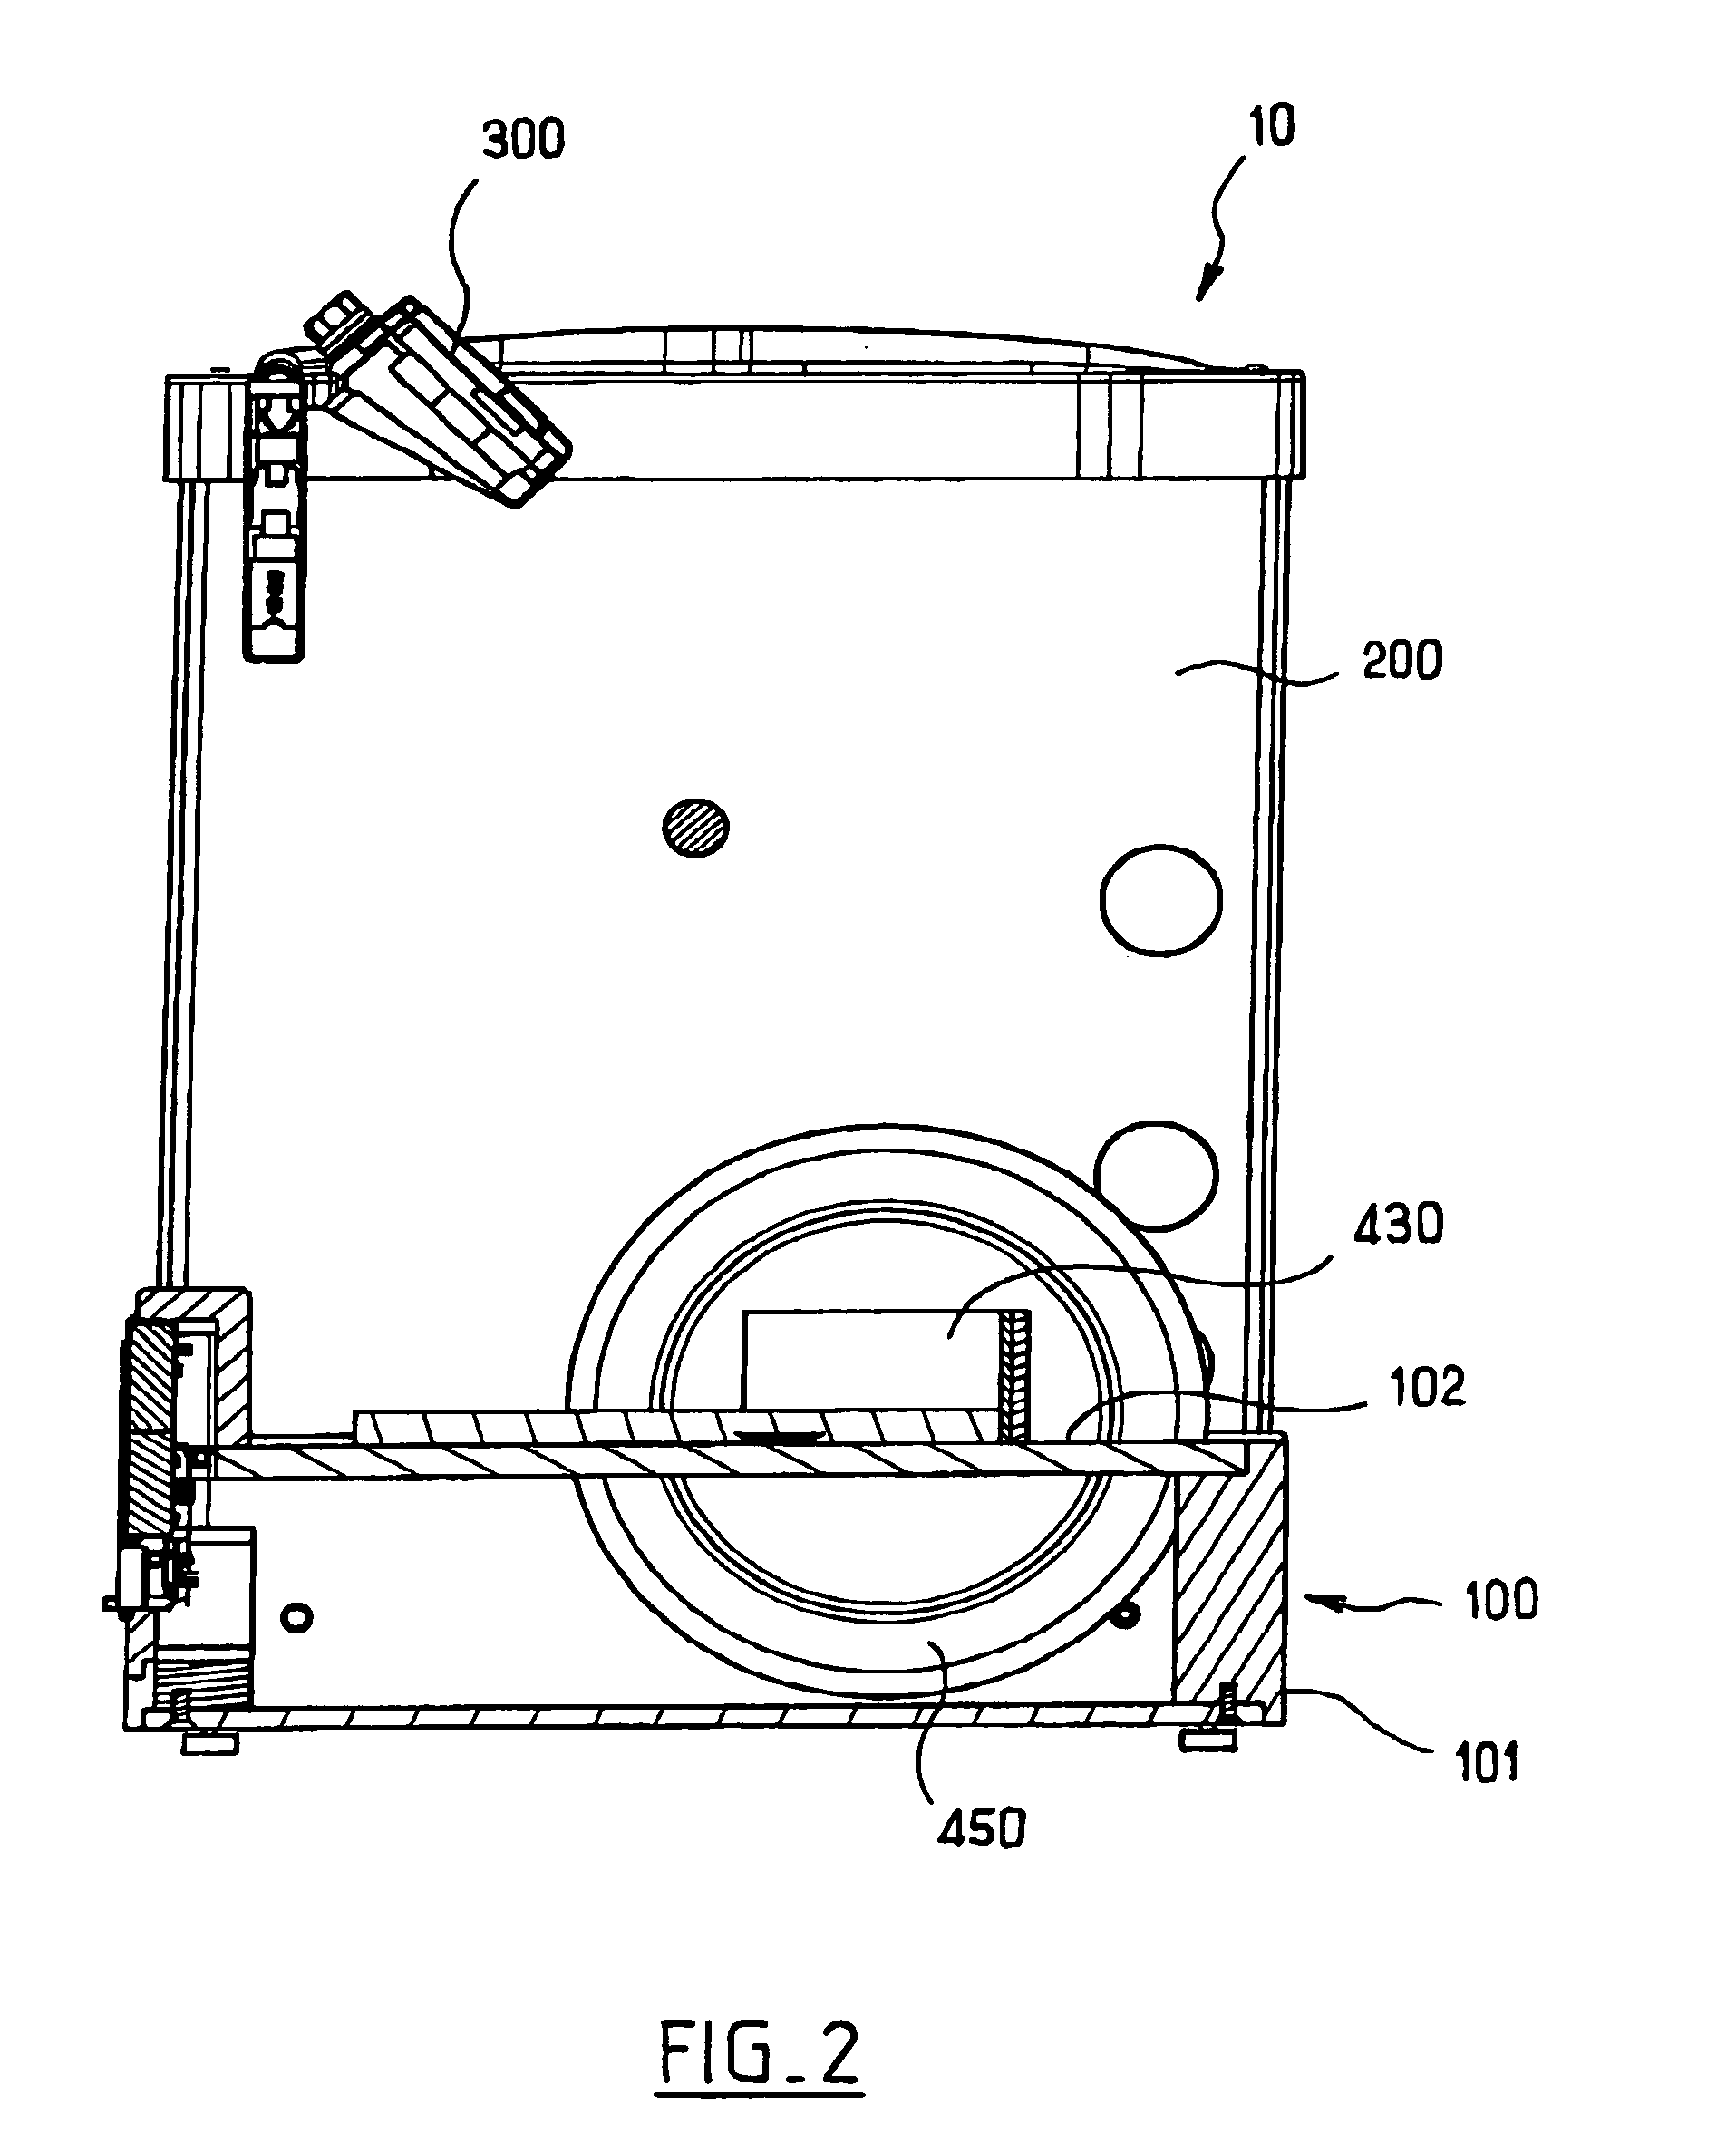 Magnetic resonance detector for detecting non-authorized materials in footwear